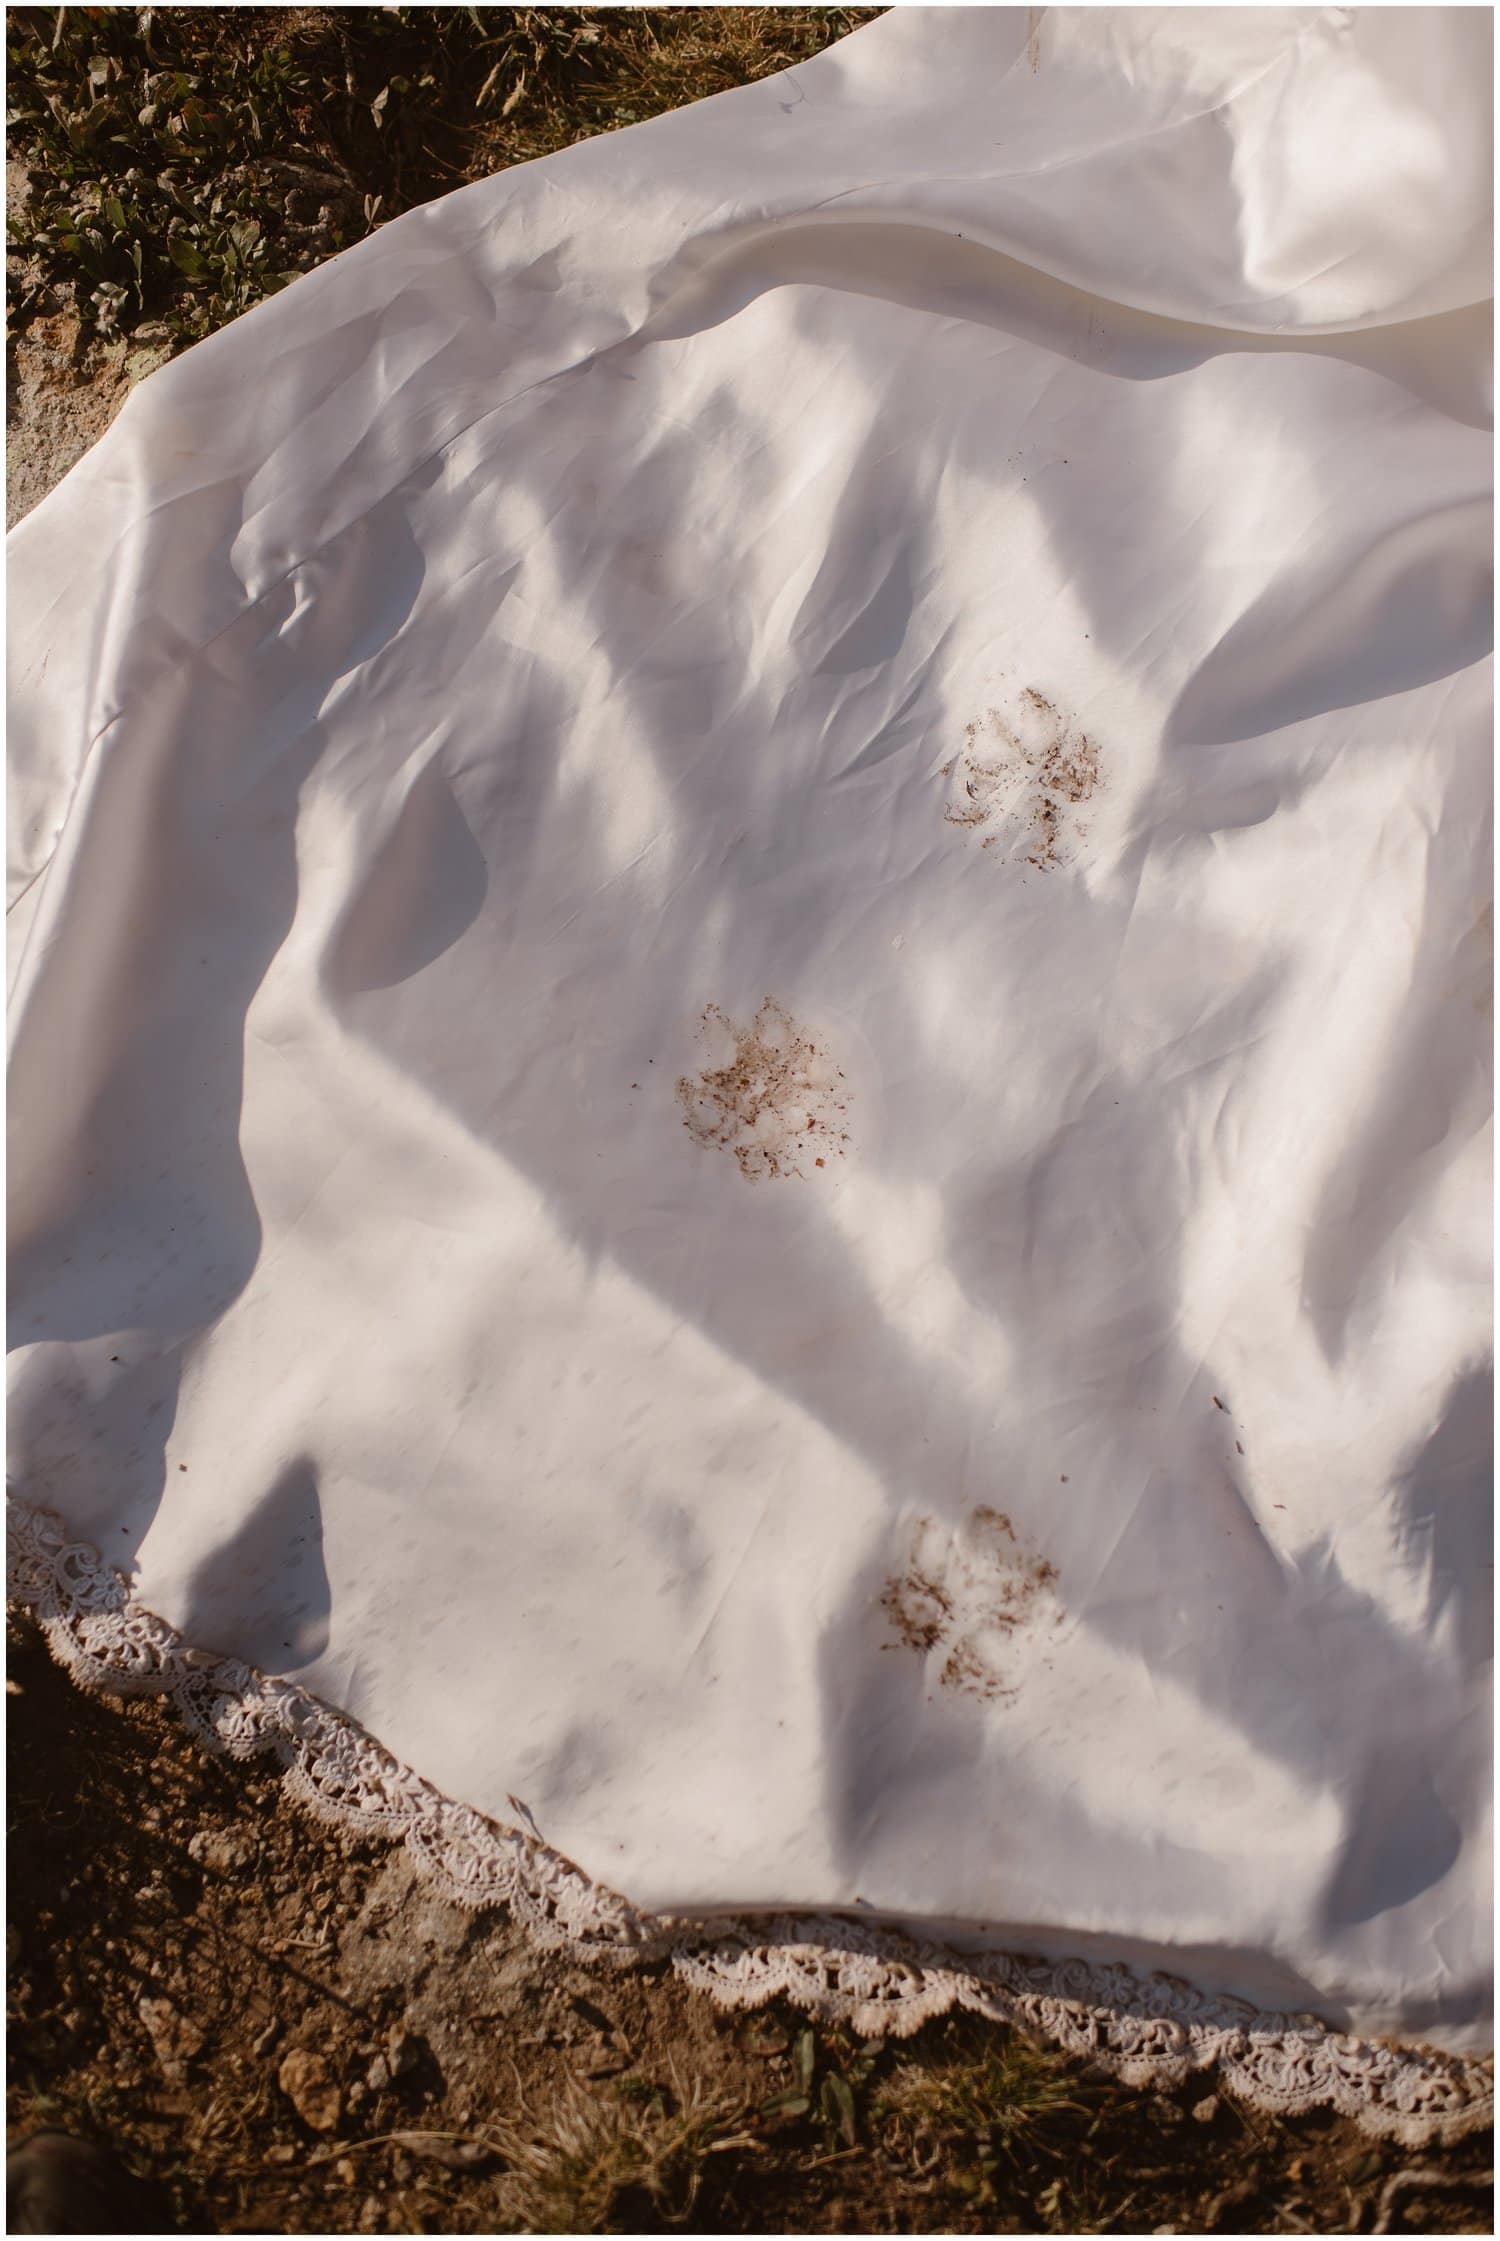 muddy dog paw prints across the train of the bride's dress. 